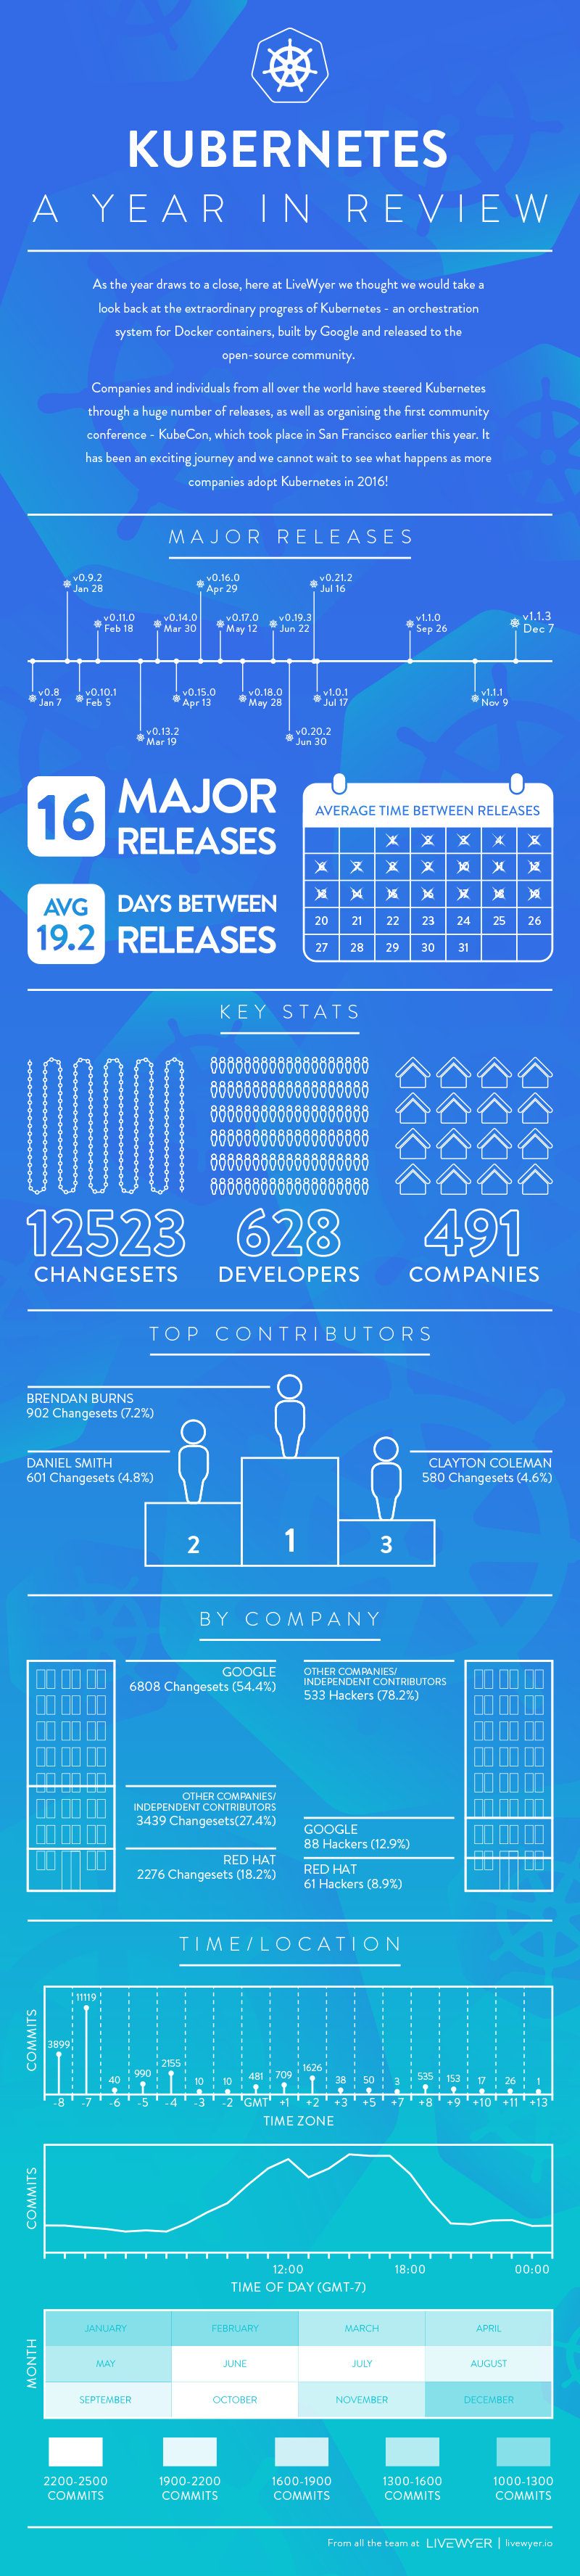 Infographic showing the progress made with Kubernetes in 2015